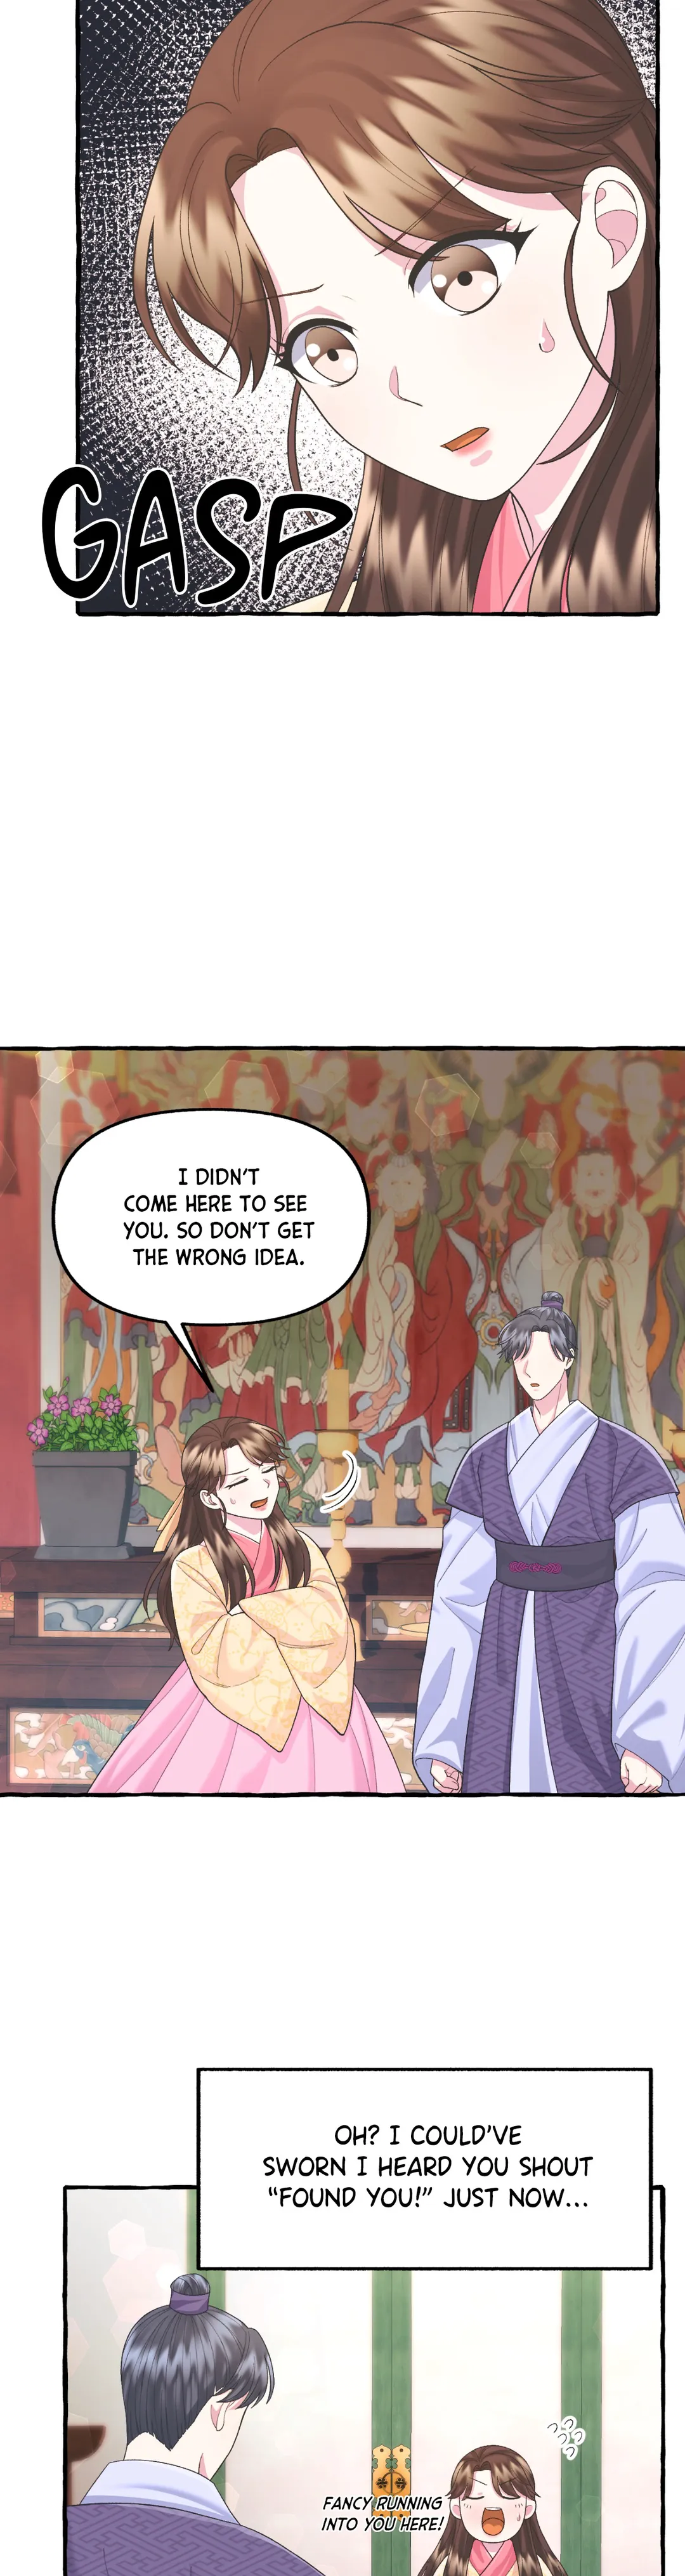 Cheer Up, Your Highness! chapter 23